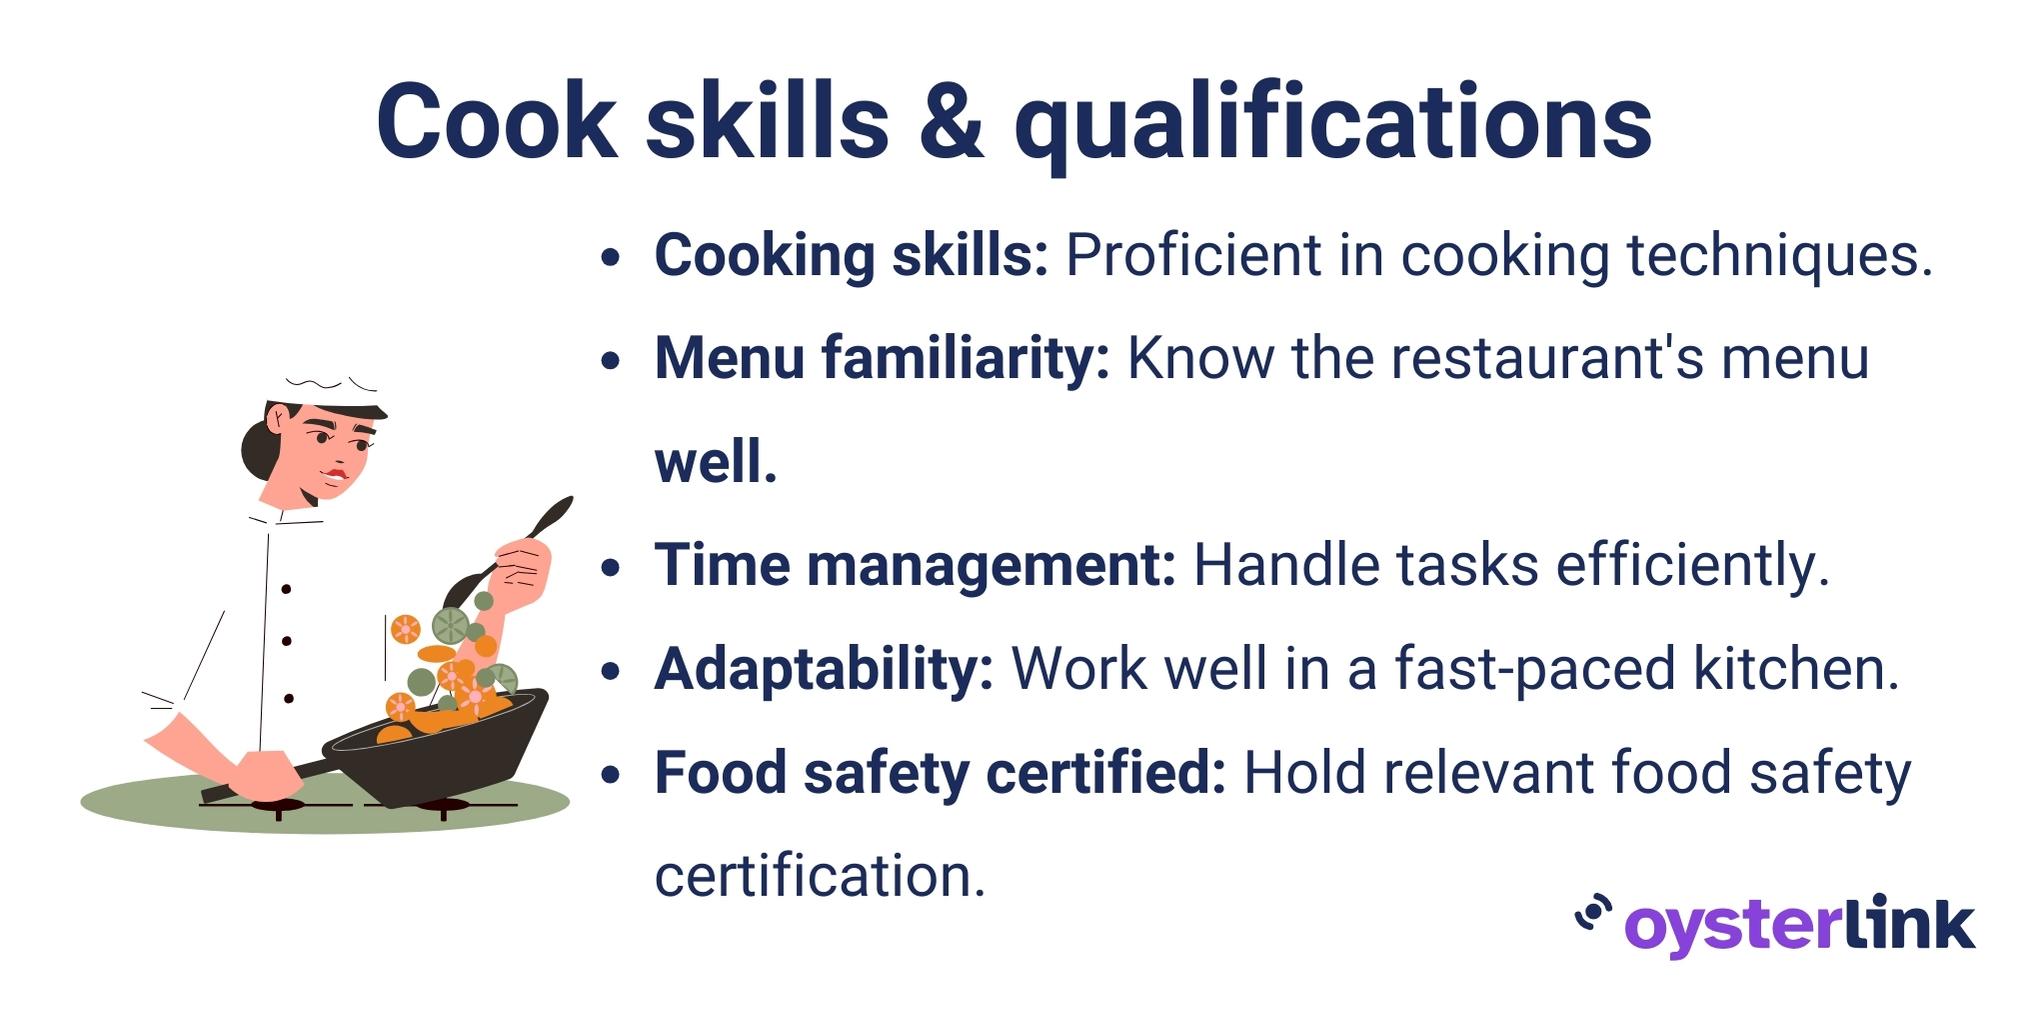 Cook skills and qualifications